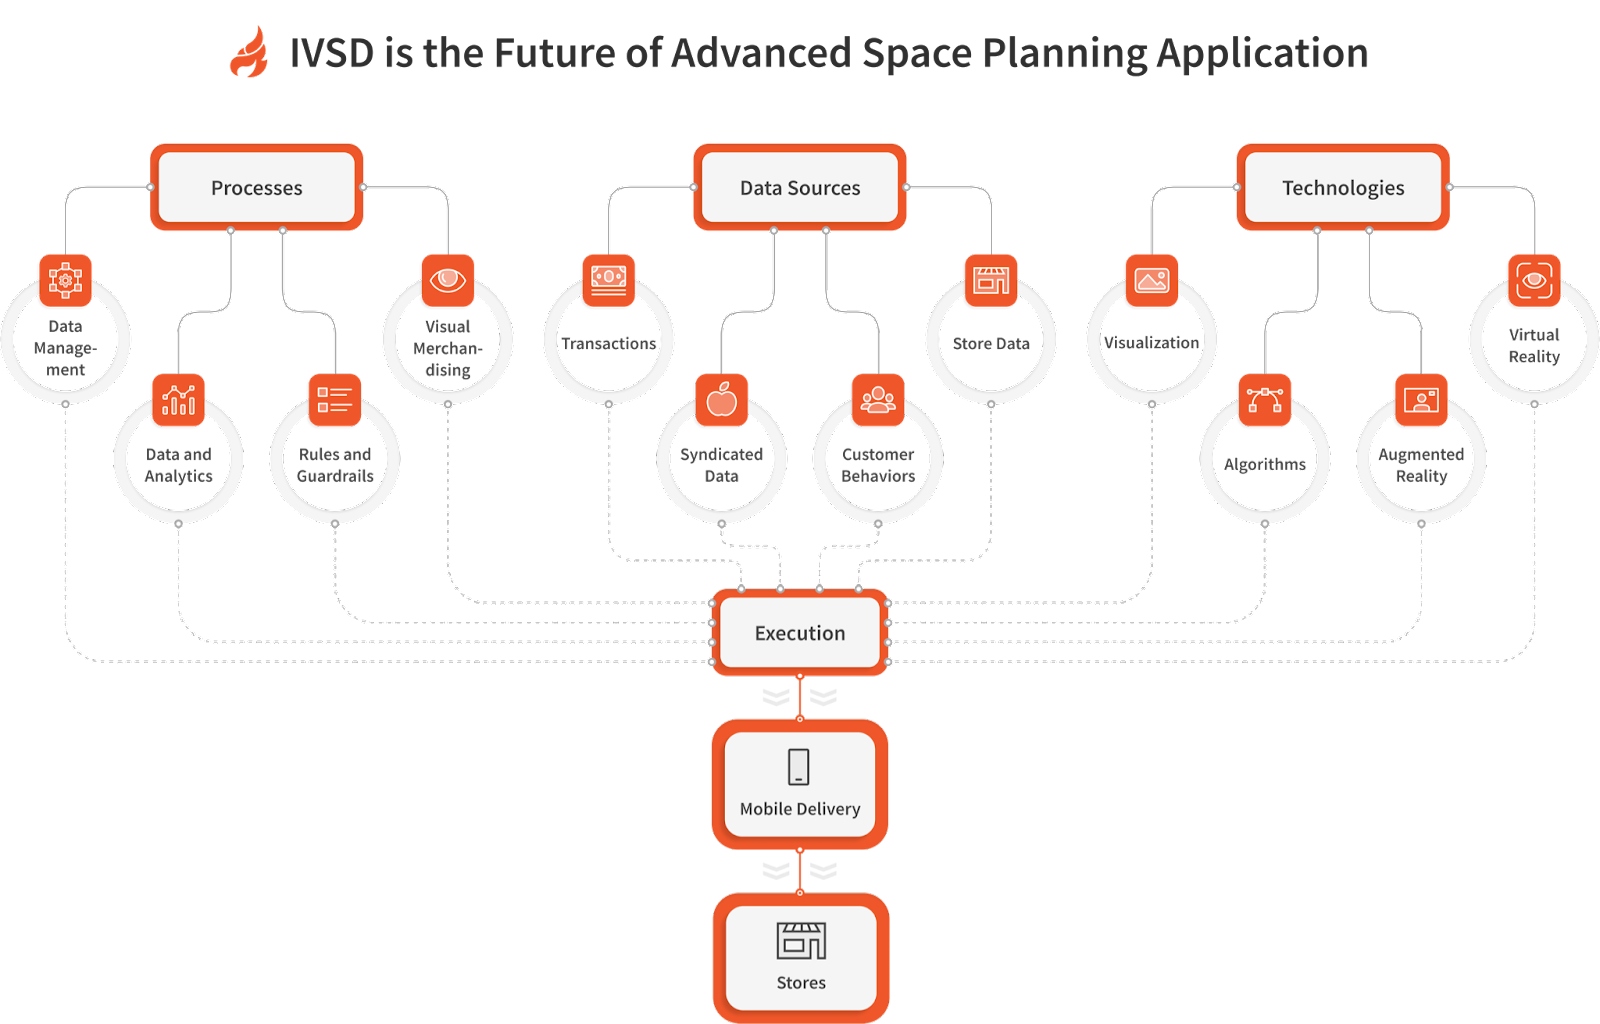 IVSD -
                        Future of Advanced Space Planning Application